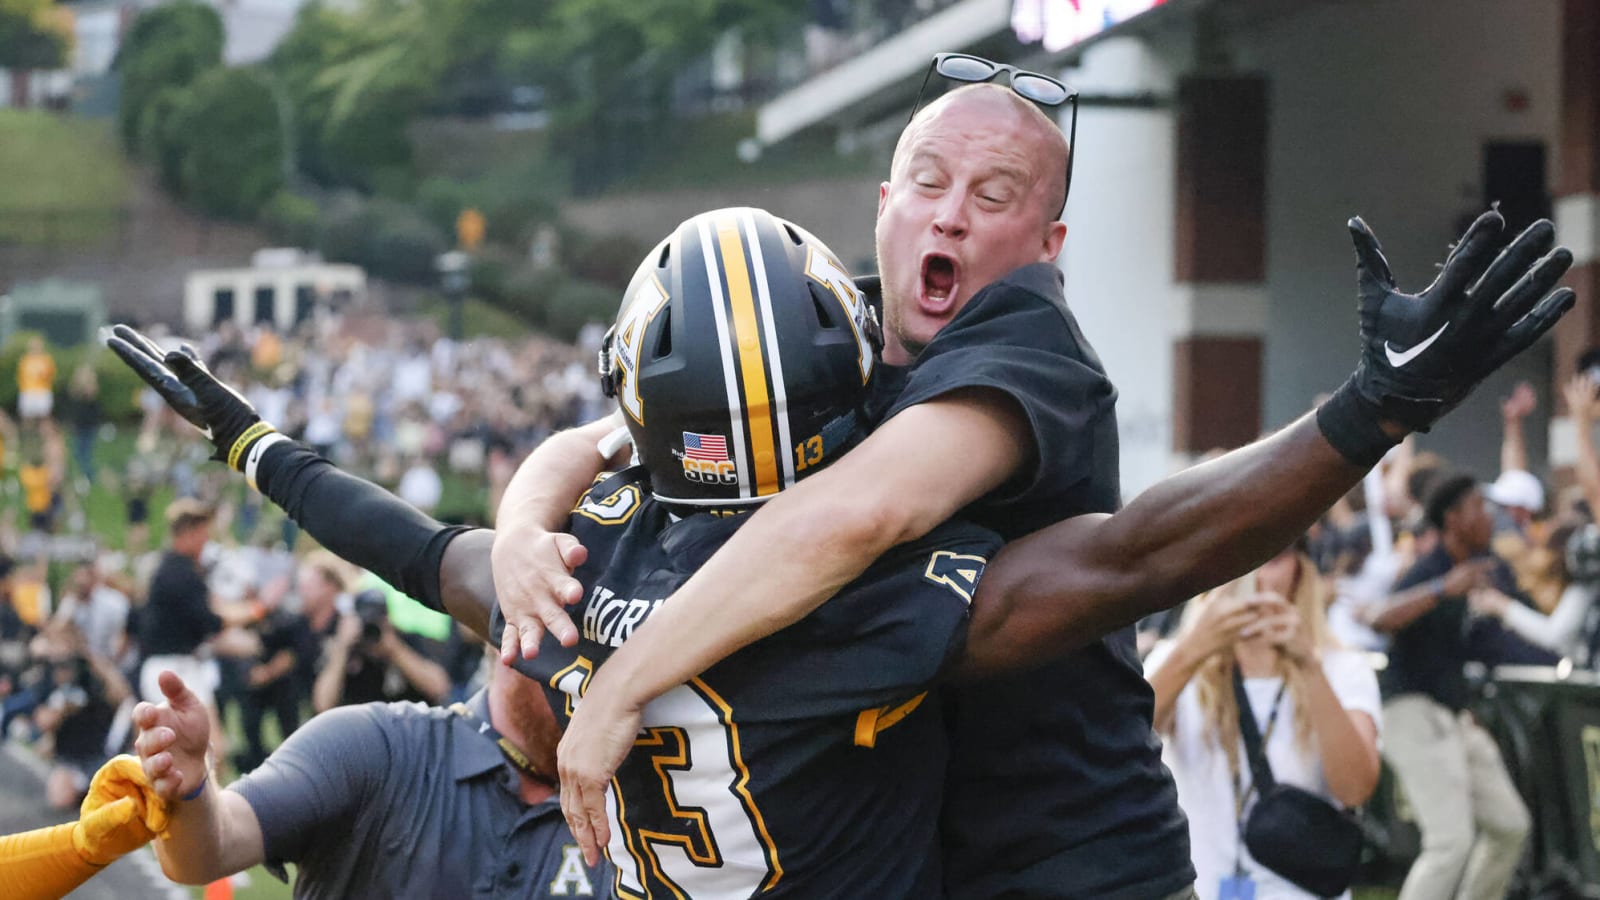 The radio call of Appalachian State's Hail Mary is incredible